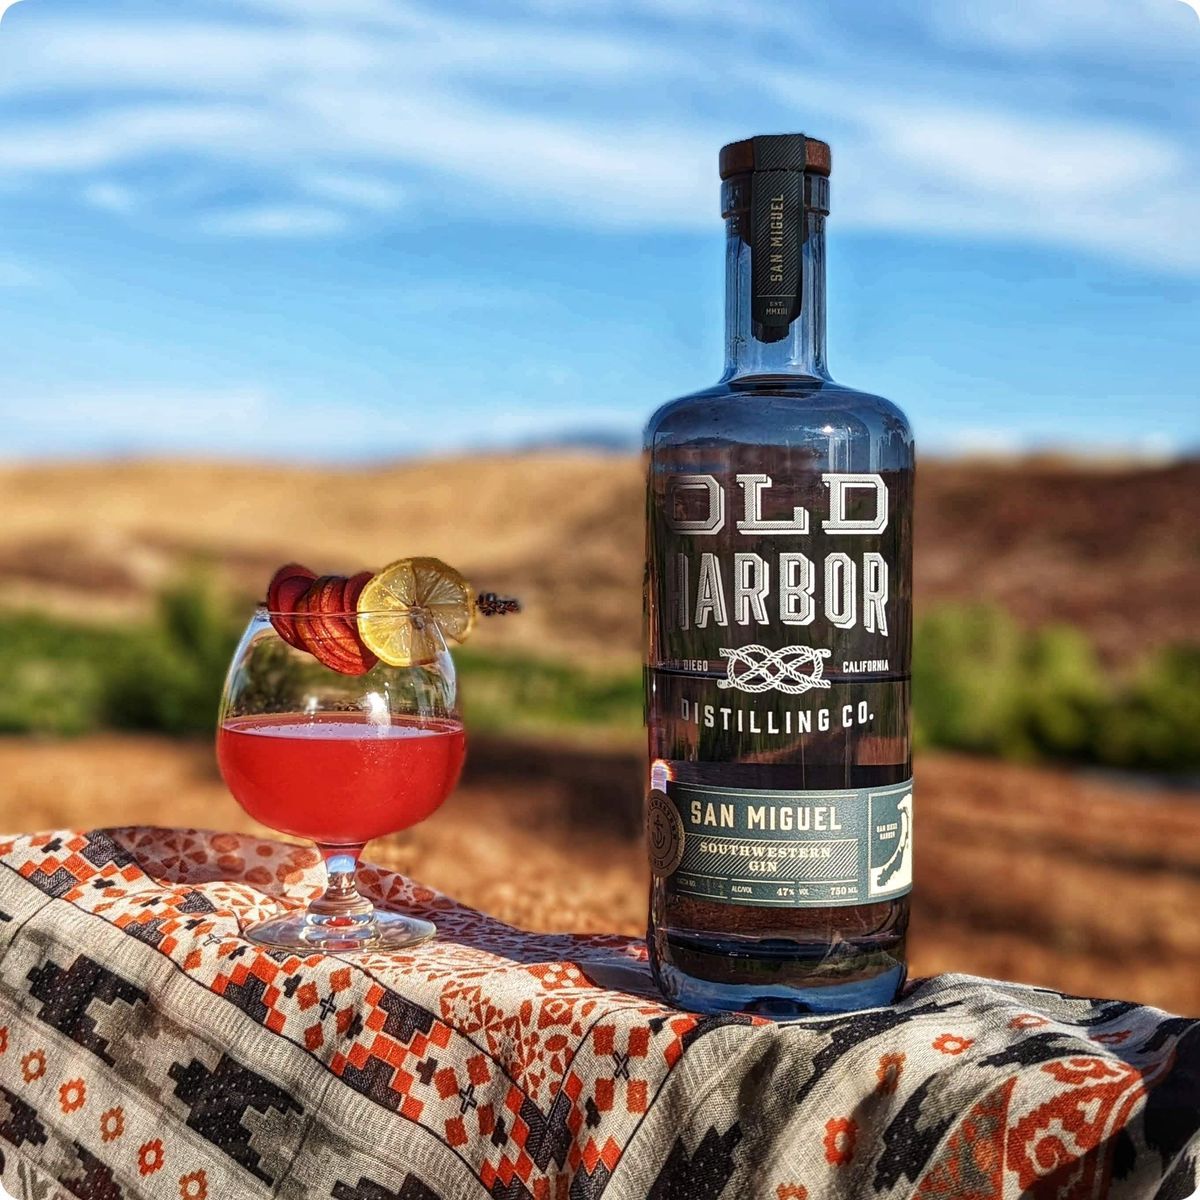 This southwestern gin is distilled using local ingredients to San Diego, where @old_harbor is located. The lime, cucumber, cilantro, and sage notes in this gin, inspired us to create a cocktail using fresh ingredients from our fruit trees.
